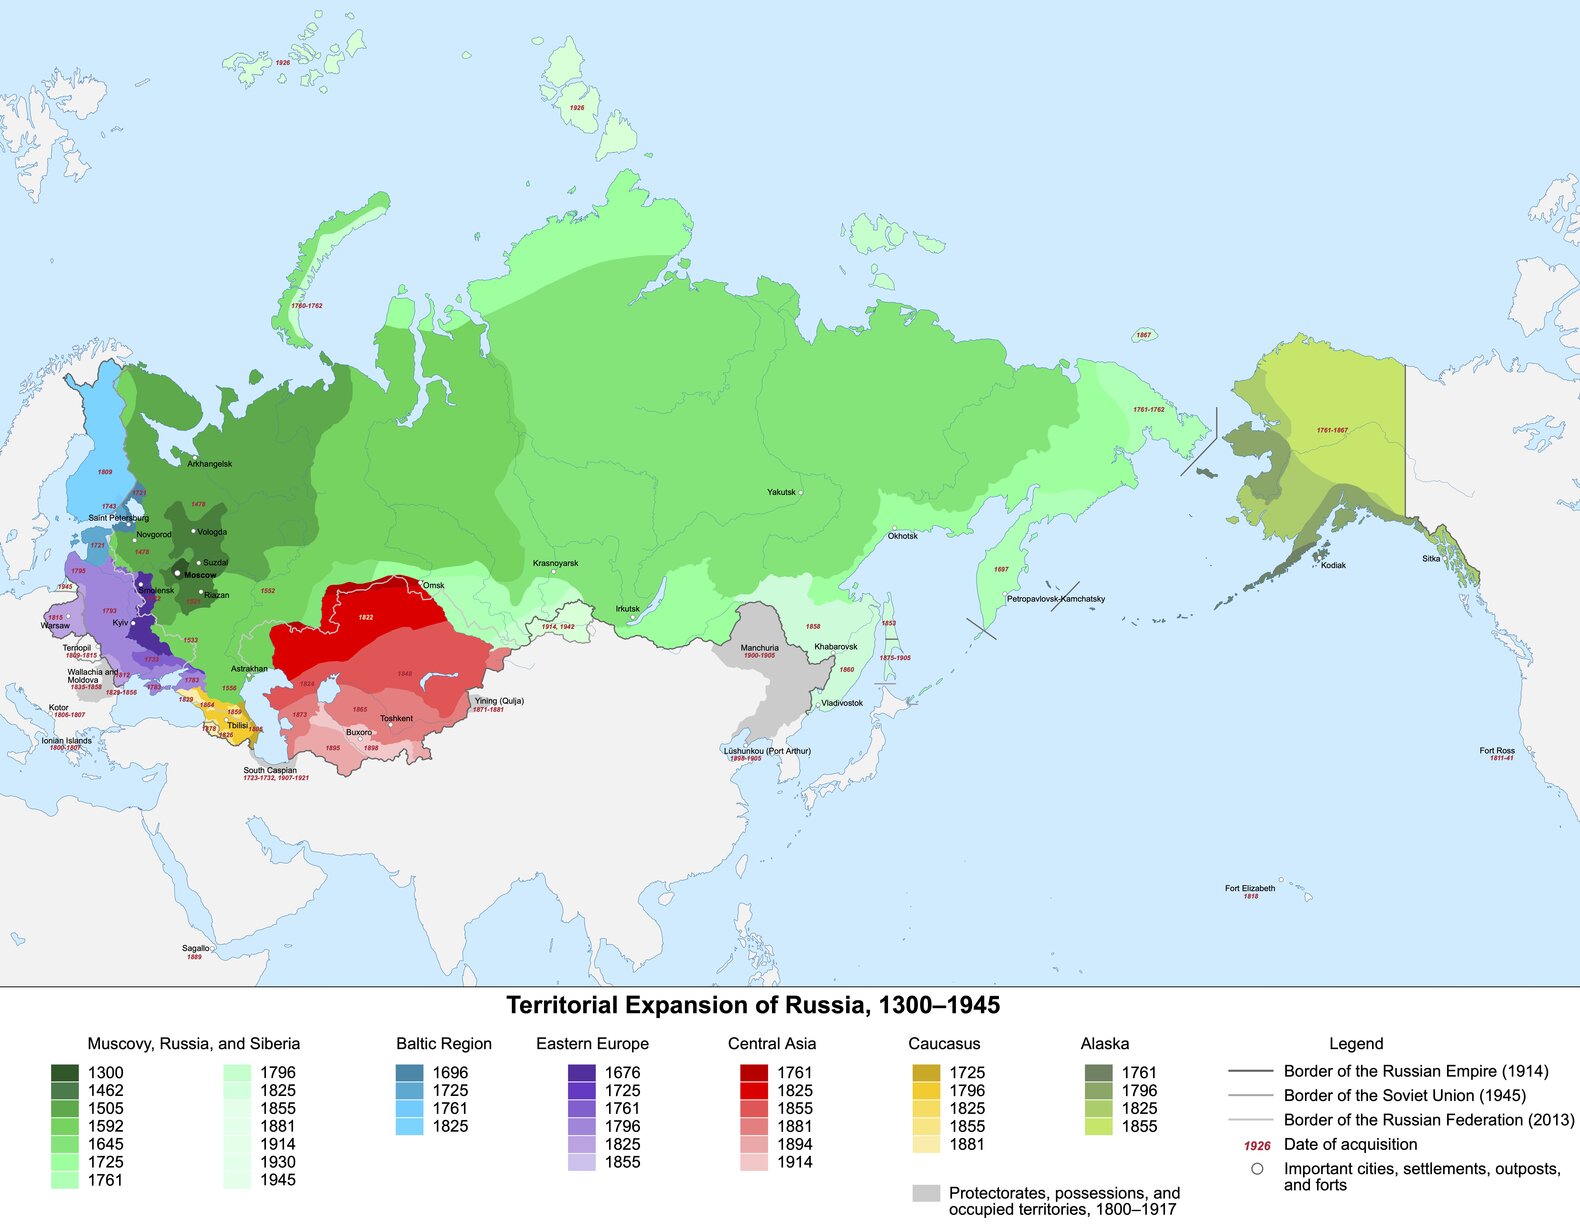 Territorial Expansion of Russia